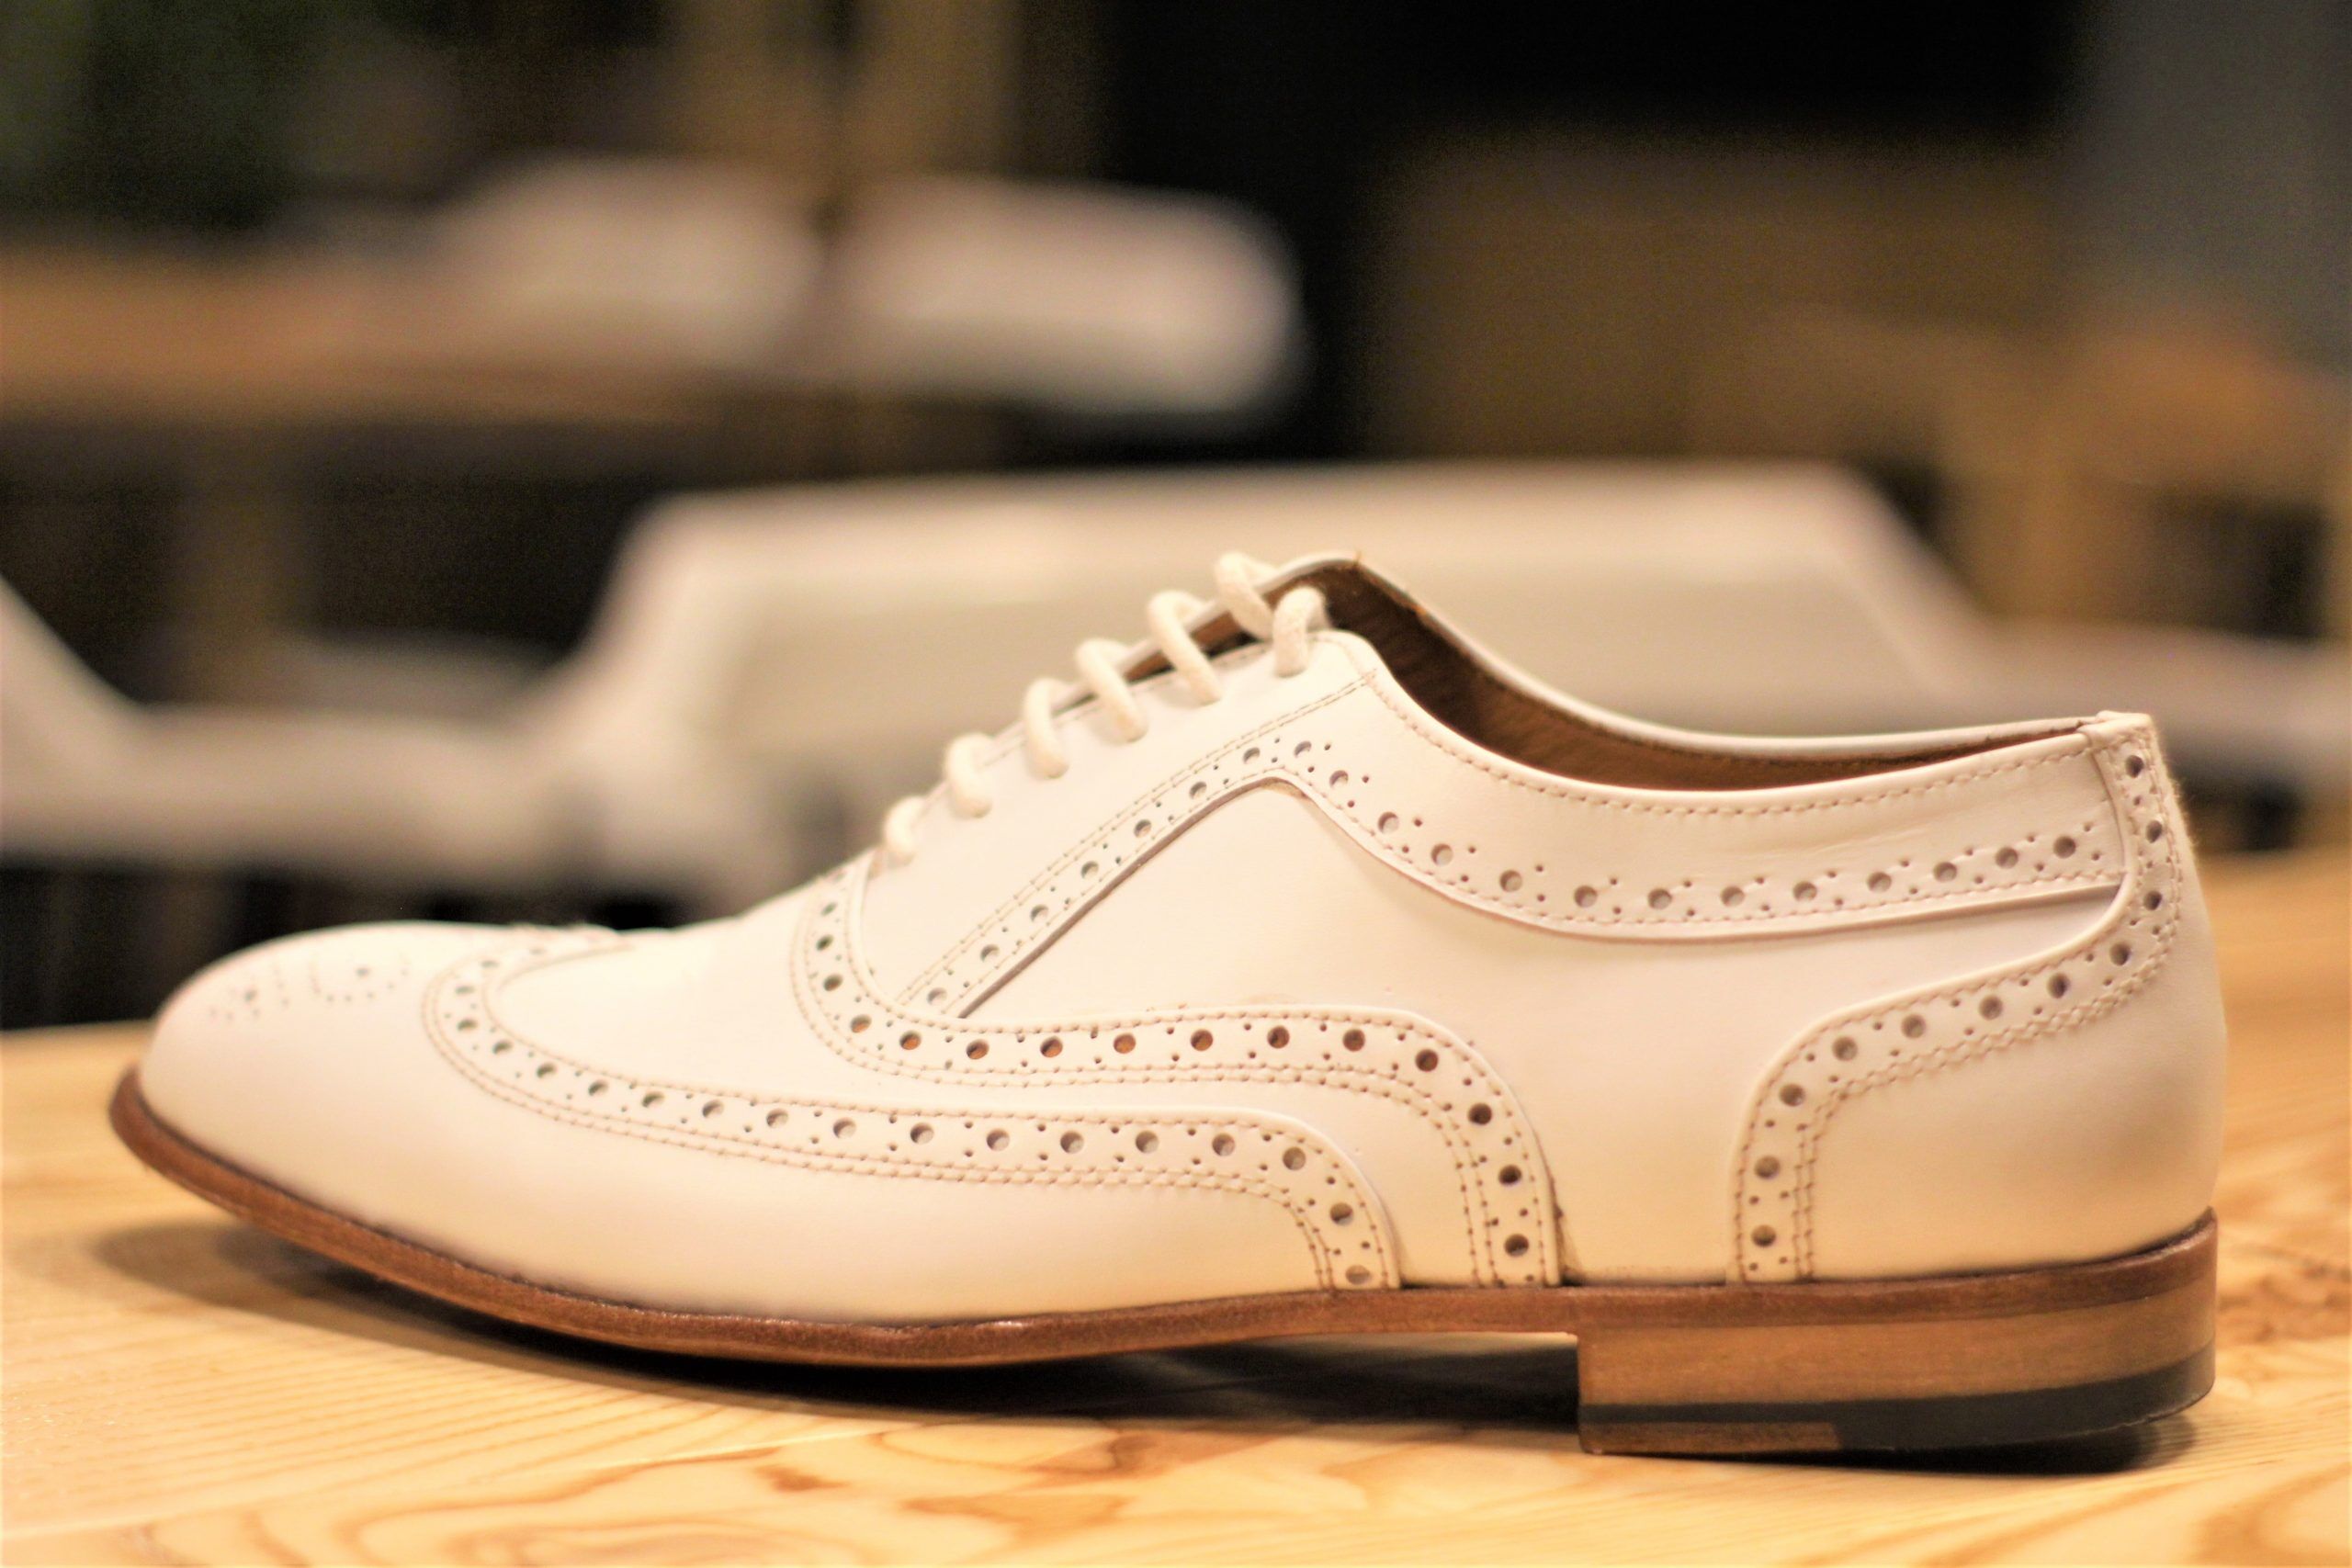 Handmade Oxford Leather Shoes in White with Wingtip by Leatheriza